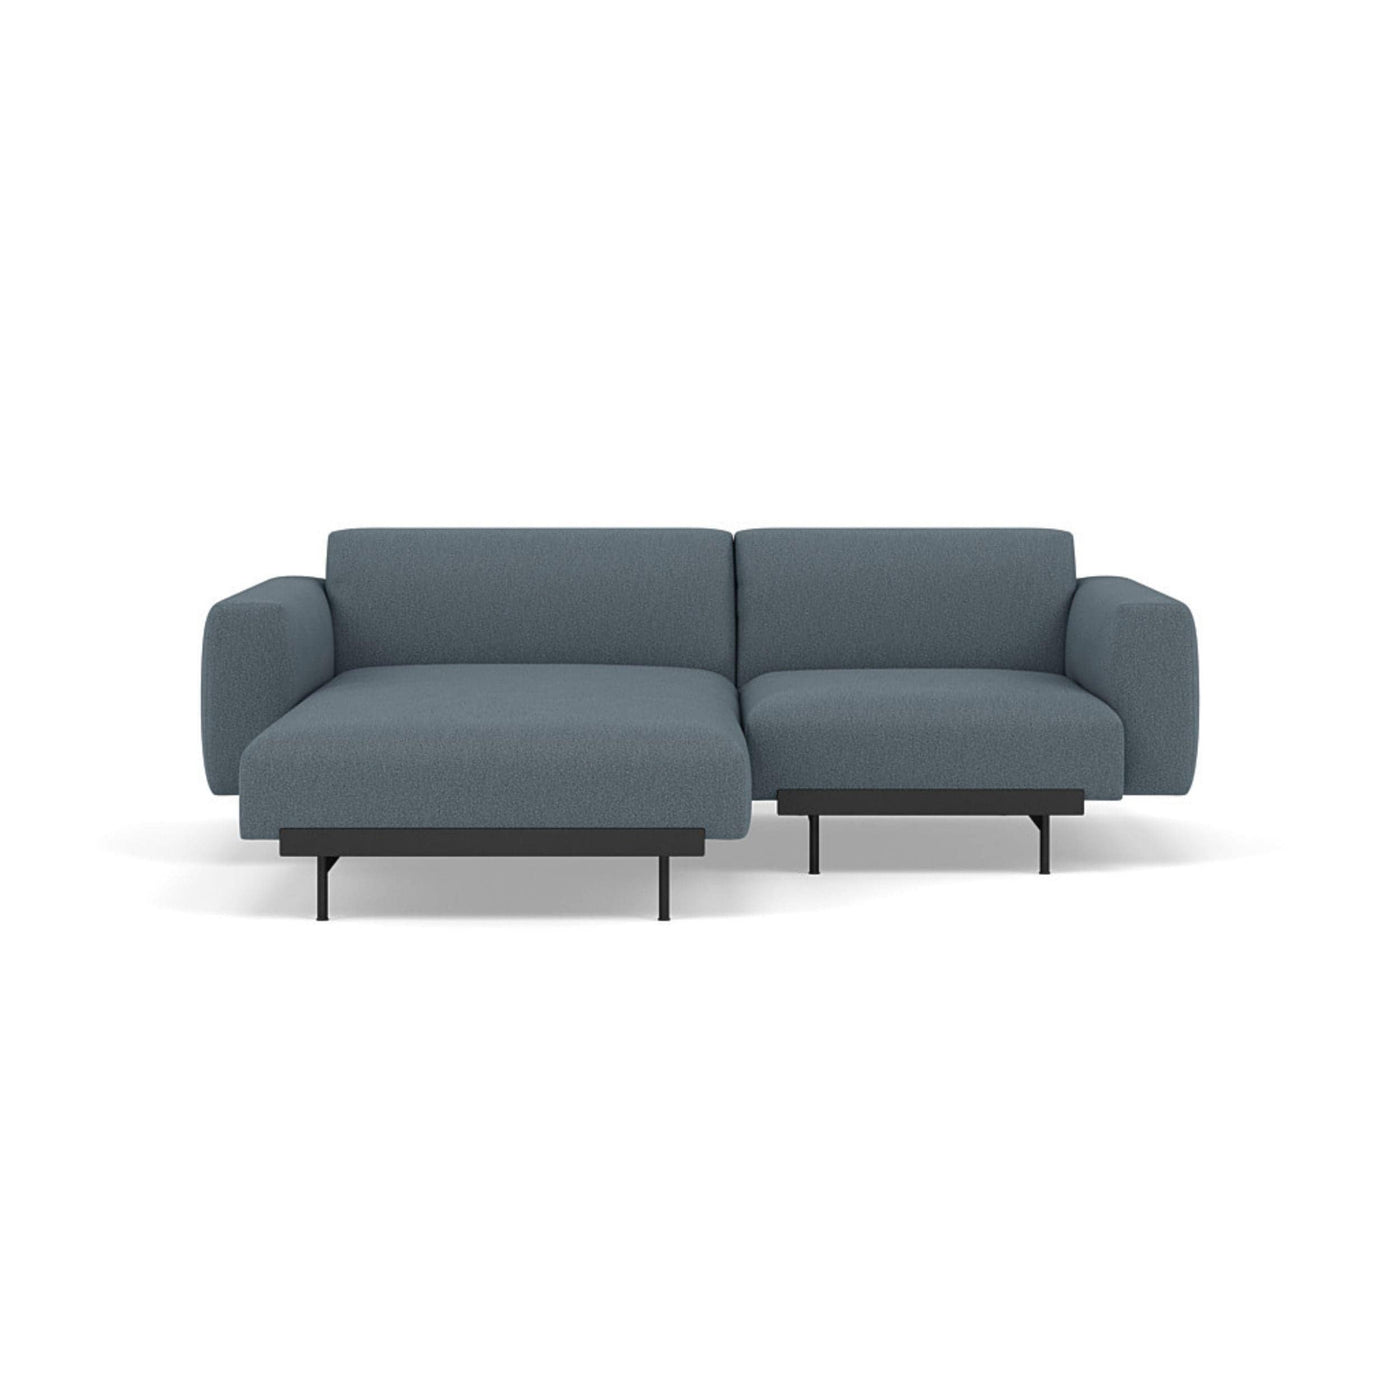 Muuto In Situ Modular 2 Seater Sofa, configuration 5 in clay 1 fabric. Made to order from someday designs #colour_clay-1-blue